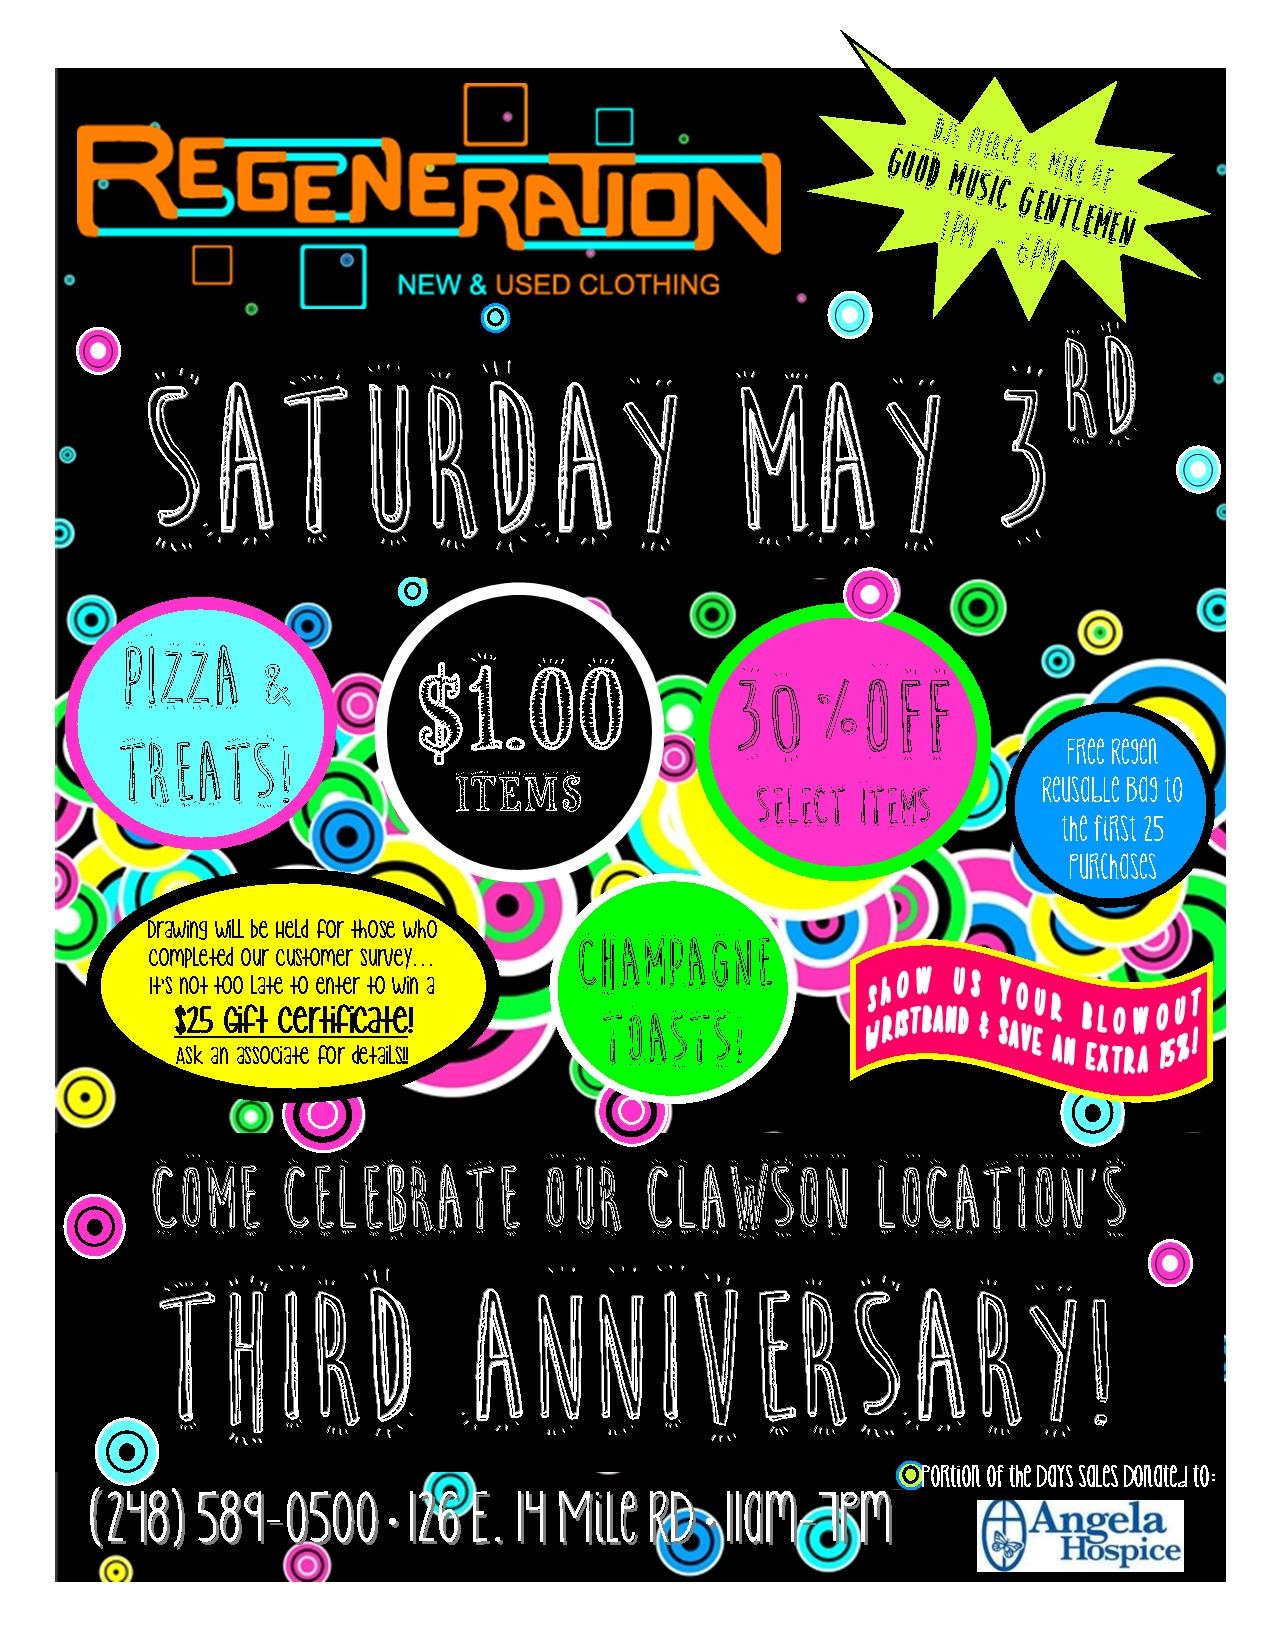 Join us for Regeneration Clawson’s 3rd Anniversary Party!